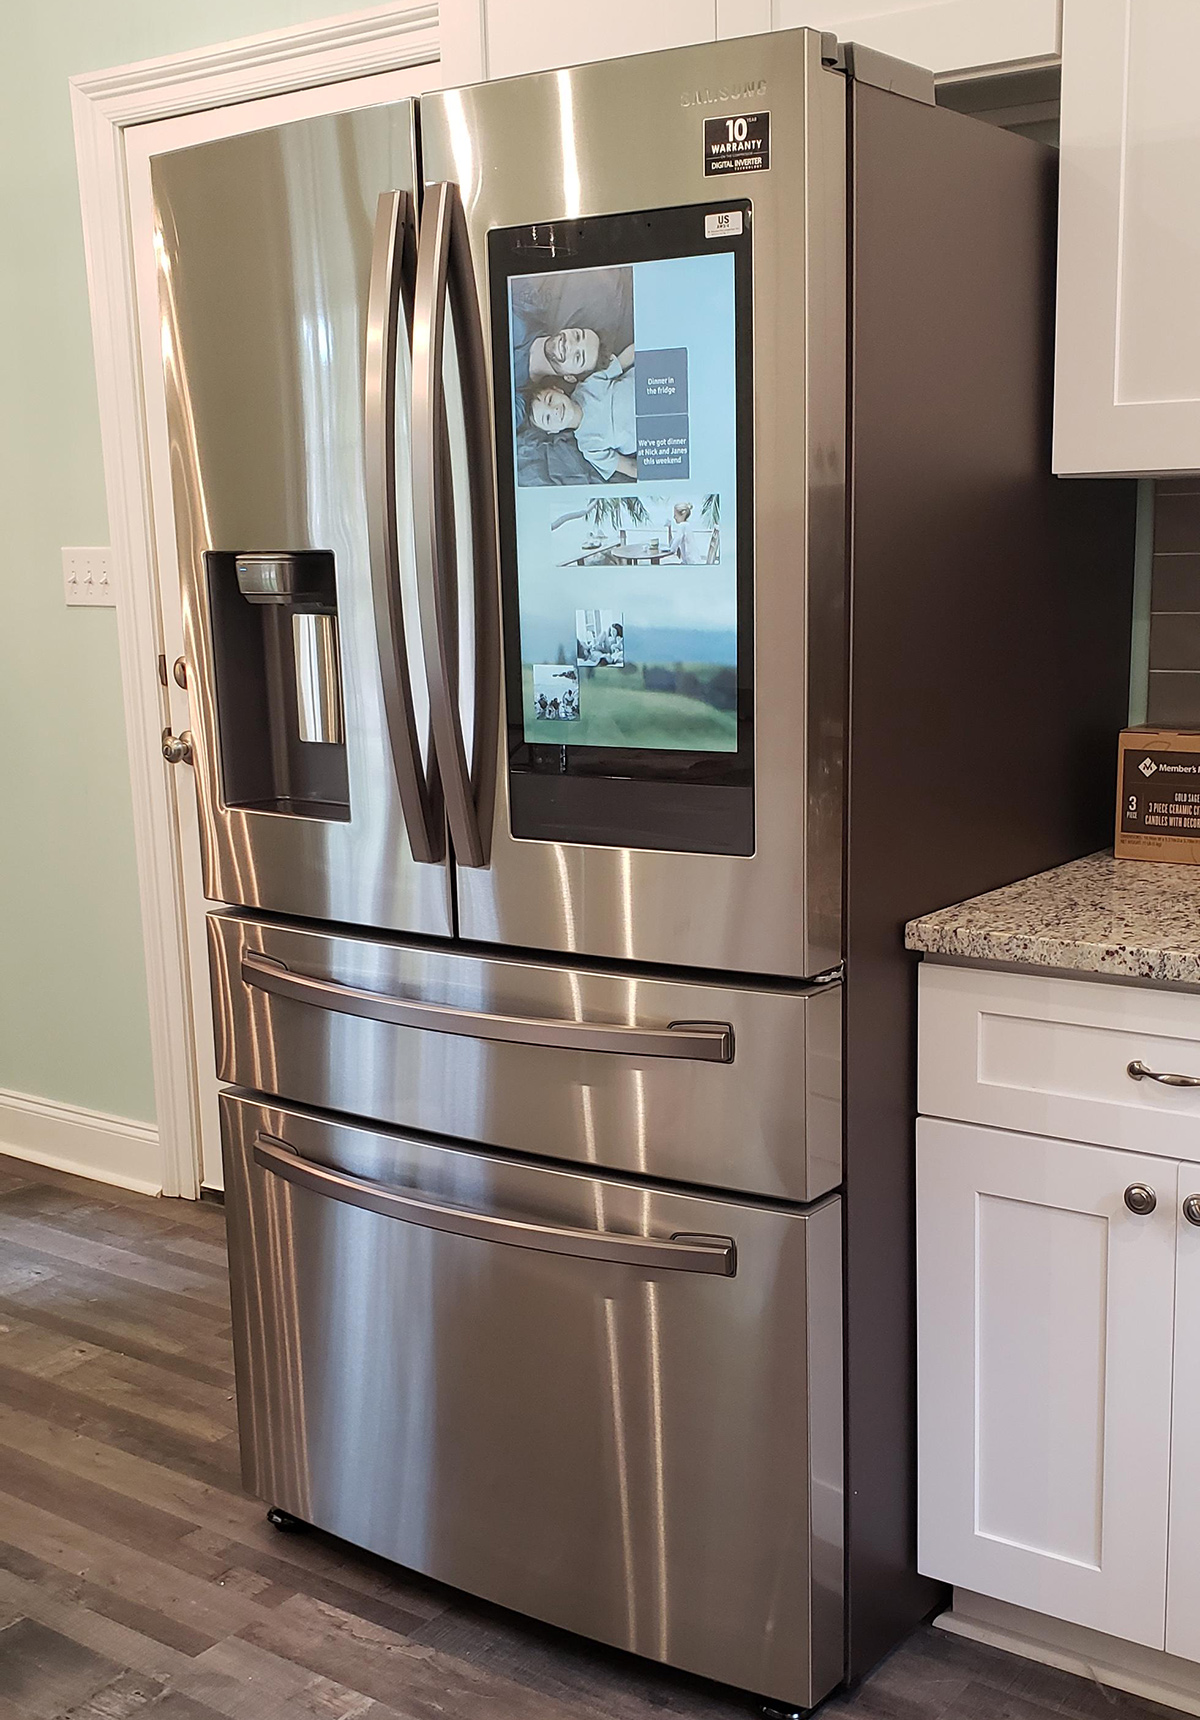 5 Best Refrigerators to Buy in 2020 (& 1 Brand That's the Worst)